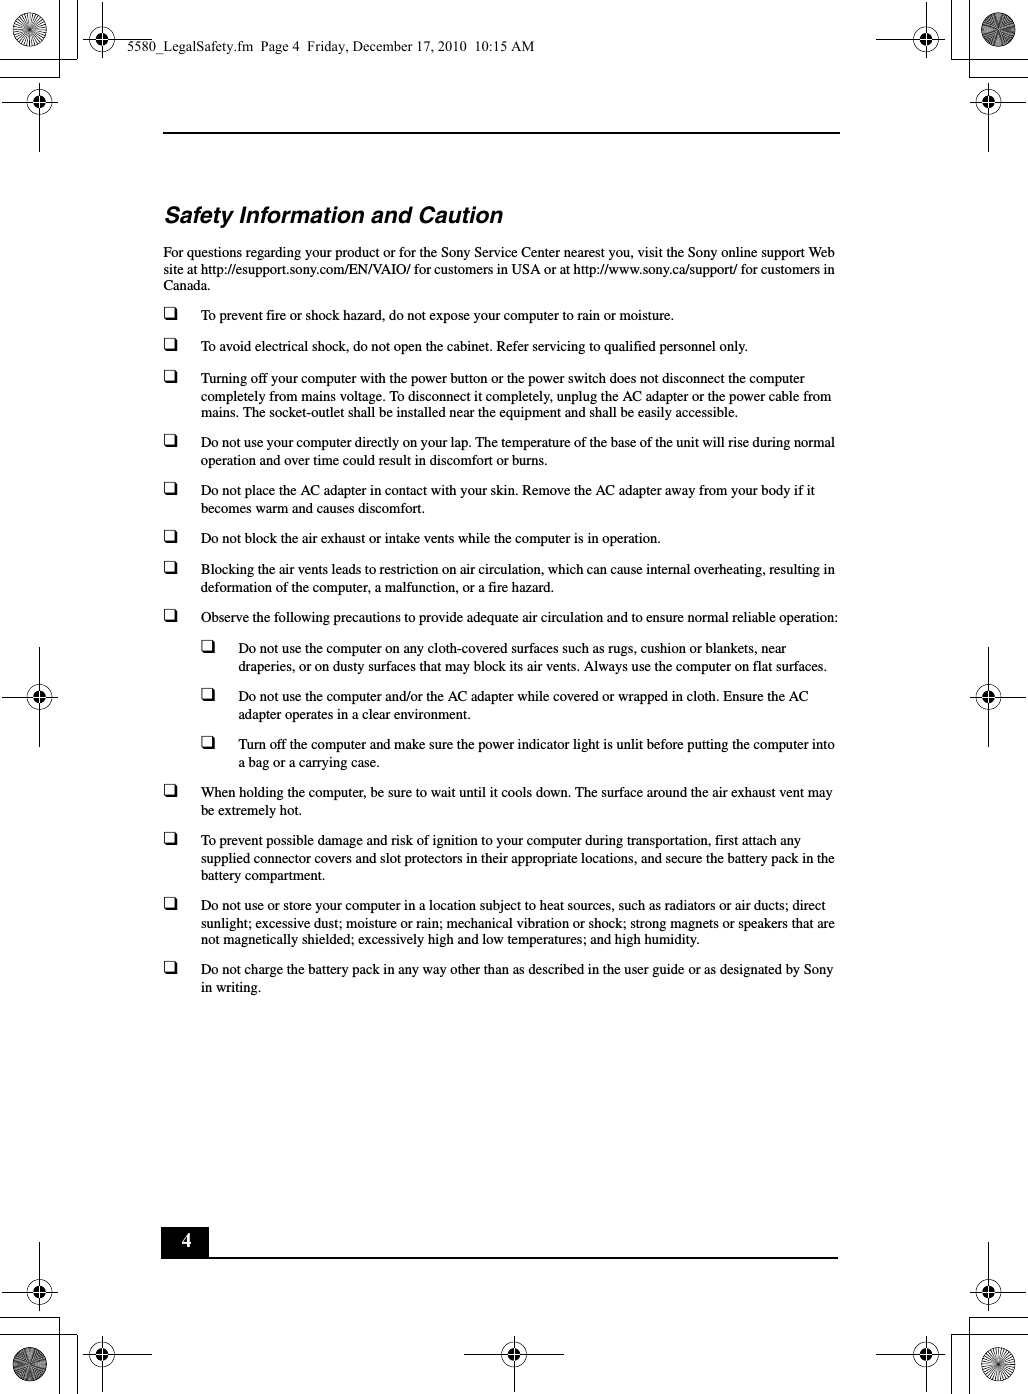 4Safety Information and CautionFor questions regarding your product or for the Sony Service Center nearest you, visit the Sony online support Web site at http://esupport.sony.com/EN/VAIO/ for customers in USA or at http://www.sony.ca/support/ for customers in Canada.❑To prevent fire or shock hazard, do not expose your computer to rain or moisture.❑To avoid electrical shock, do not open the cabinet. Refer servicing to qualified personnel only.❑Turning off your computer with the power button or the power switch does not disconnect the computer completely from mains voltage. To disconnect it completely, unplug the AC adapter or the power cable from mains. The socket-outlet shall be installed near the equipment and shall be easily accessible.❑Do not use your computer directly on your lap. The temperature of the base of the unit will rise during normal operation and over time could result in discomfort or burns.❑Do not place the AC adapter in contact with your skin. Remove the AC adapter away from your body if it becomes warm and causes discomfort.❑Do not block the air exhaust or intake vents while the computer is in operation.❑Blocking the air vents leads to restriction on air circulation, which can cause internal overheating, resulting in deformation of the computer, a malfunction, or a fire hazard.❑Observe the following precautions to provide adequate air circulation and to ensure normal reliable operation:❑Do not use the computer on any cloth-covered surfaces such as rugs, cushion or blankets, near draperies, or on dusty surfaces that may block its air vents. Always use the computer on flat surfaces.❑Do not use the computer and/or the AC adapter while covered or wrapped in cloth. Ensure the AC adapter operates in a clear environment.❑Turn off the computer and make sure the power indicator light is unlit before putting the computer into a bag or a carrying case.❑When holding the computer, be sure to wait until it cools down. The surface around the air exhaust vent may be extremely hot.❑To prevent possible damage and risk of ignition to your computer during transportation, first attach any supplied connector covers and slot protectors in their appropriate locations, and secure the battery pack in the battery compartment.❑Do not use or store your computer in a location subject to heat sources, such as radiators or air ducts; direct sunlight; excessive dust; moisture or rain; mechanical vibration or shock; strong magnets or speakers that are not magnetically shielded; excessively high and low temperatures; and high humidity.❑Do not charge the battery pack in any way other than as described in the user guide or as designated by Sony in writing.5580_LegalSafety.fm  Page 4  Friday, December 17, 2010  10:15 AM